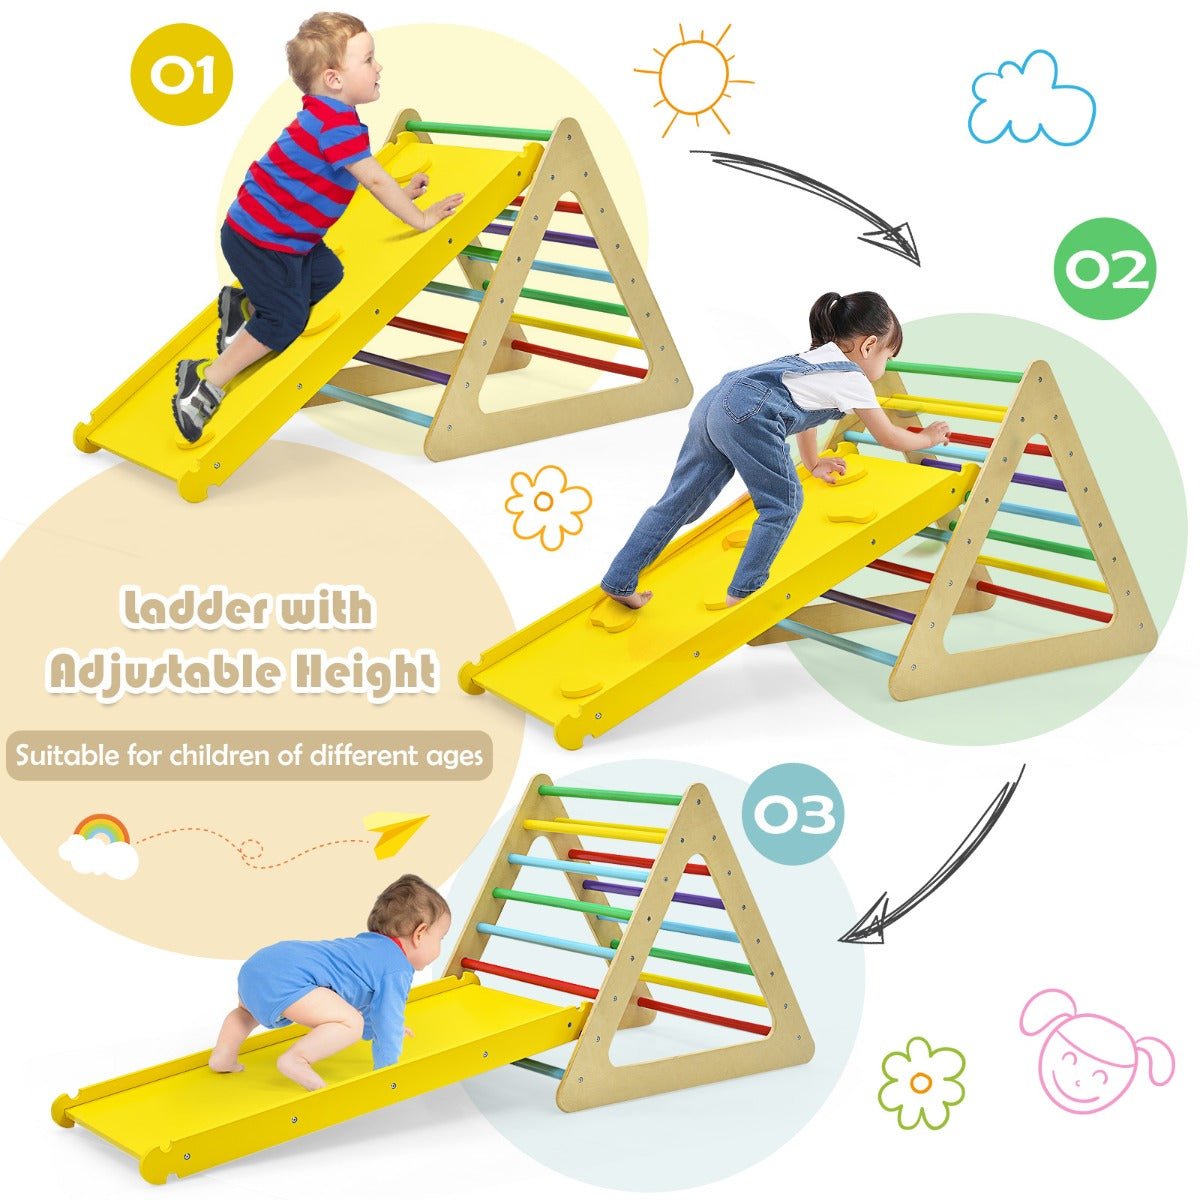 Versatile 3 in 1 Climbing Toy - Triangle Ladders & Ramp for Kids